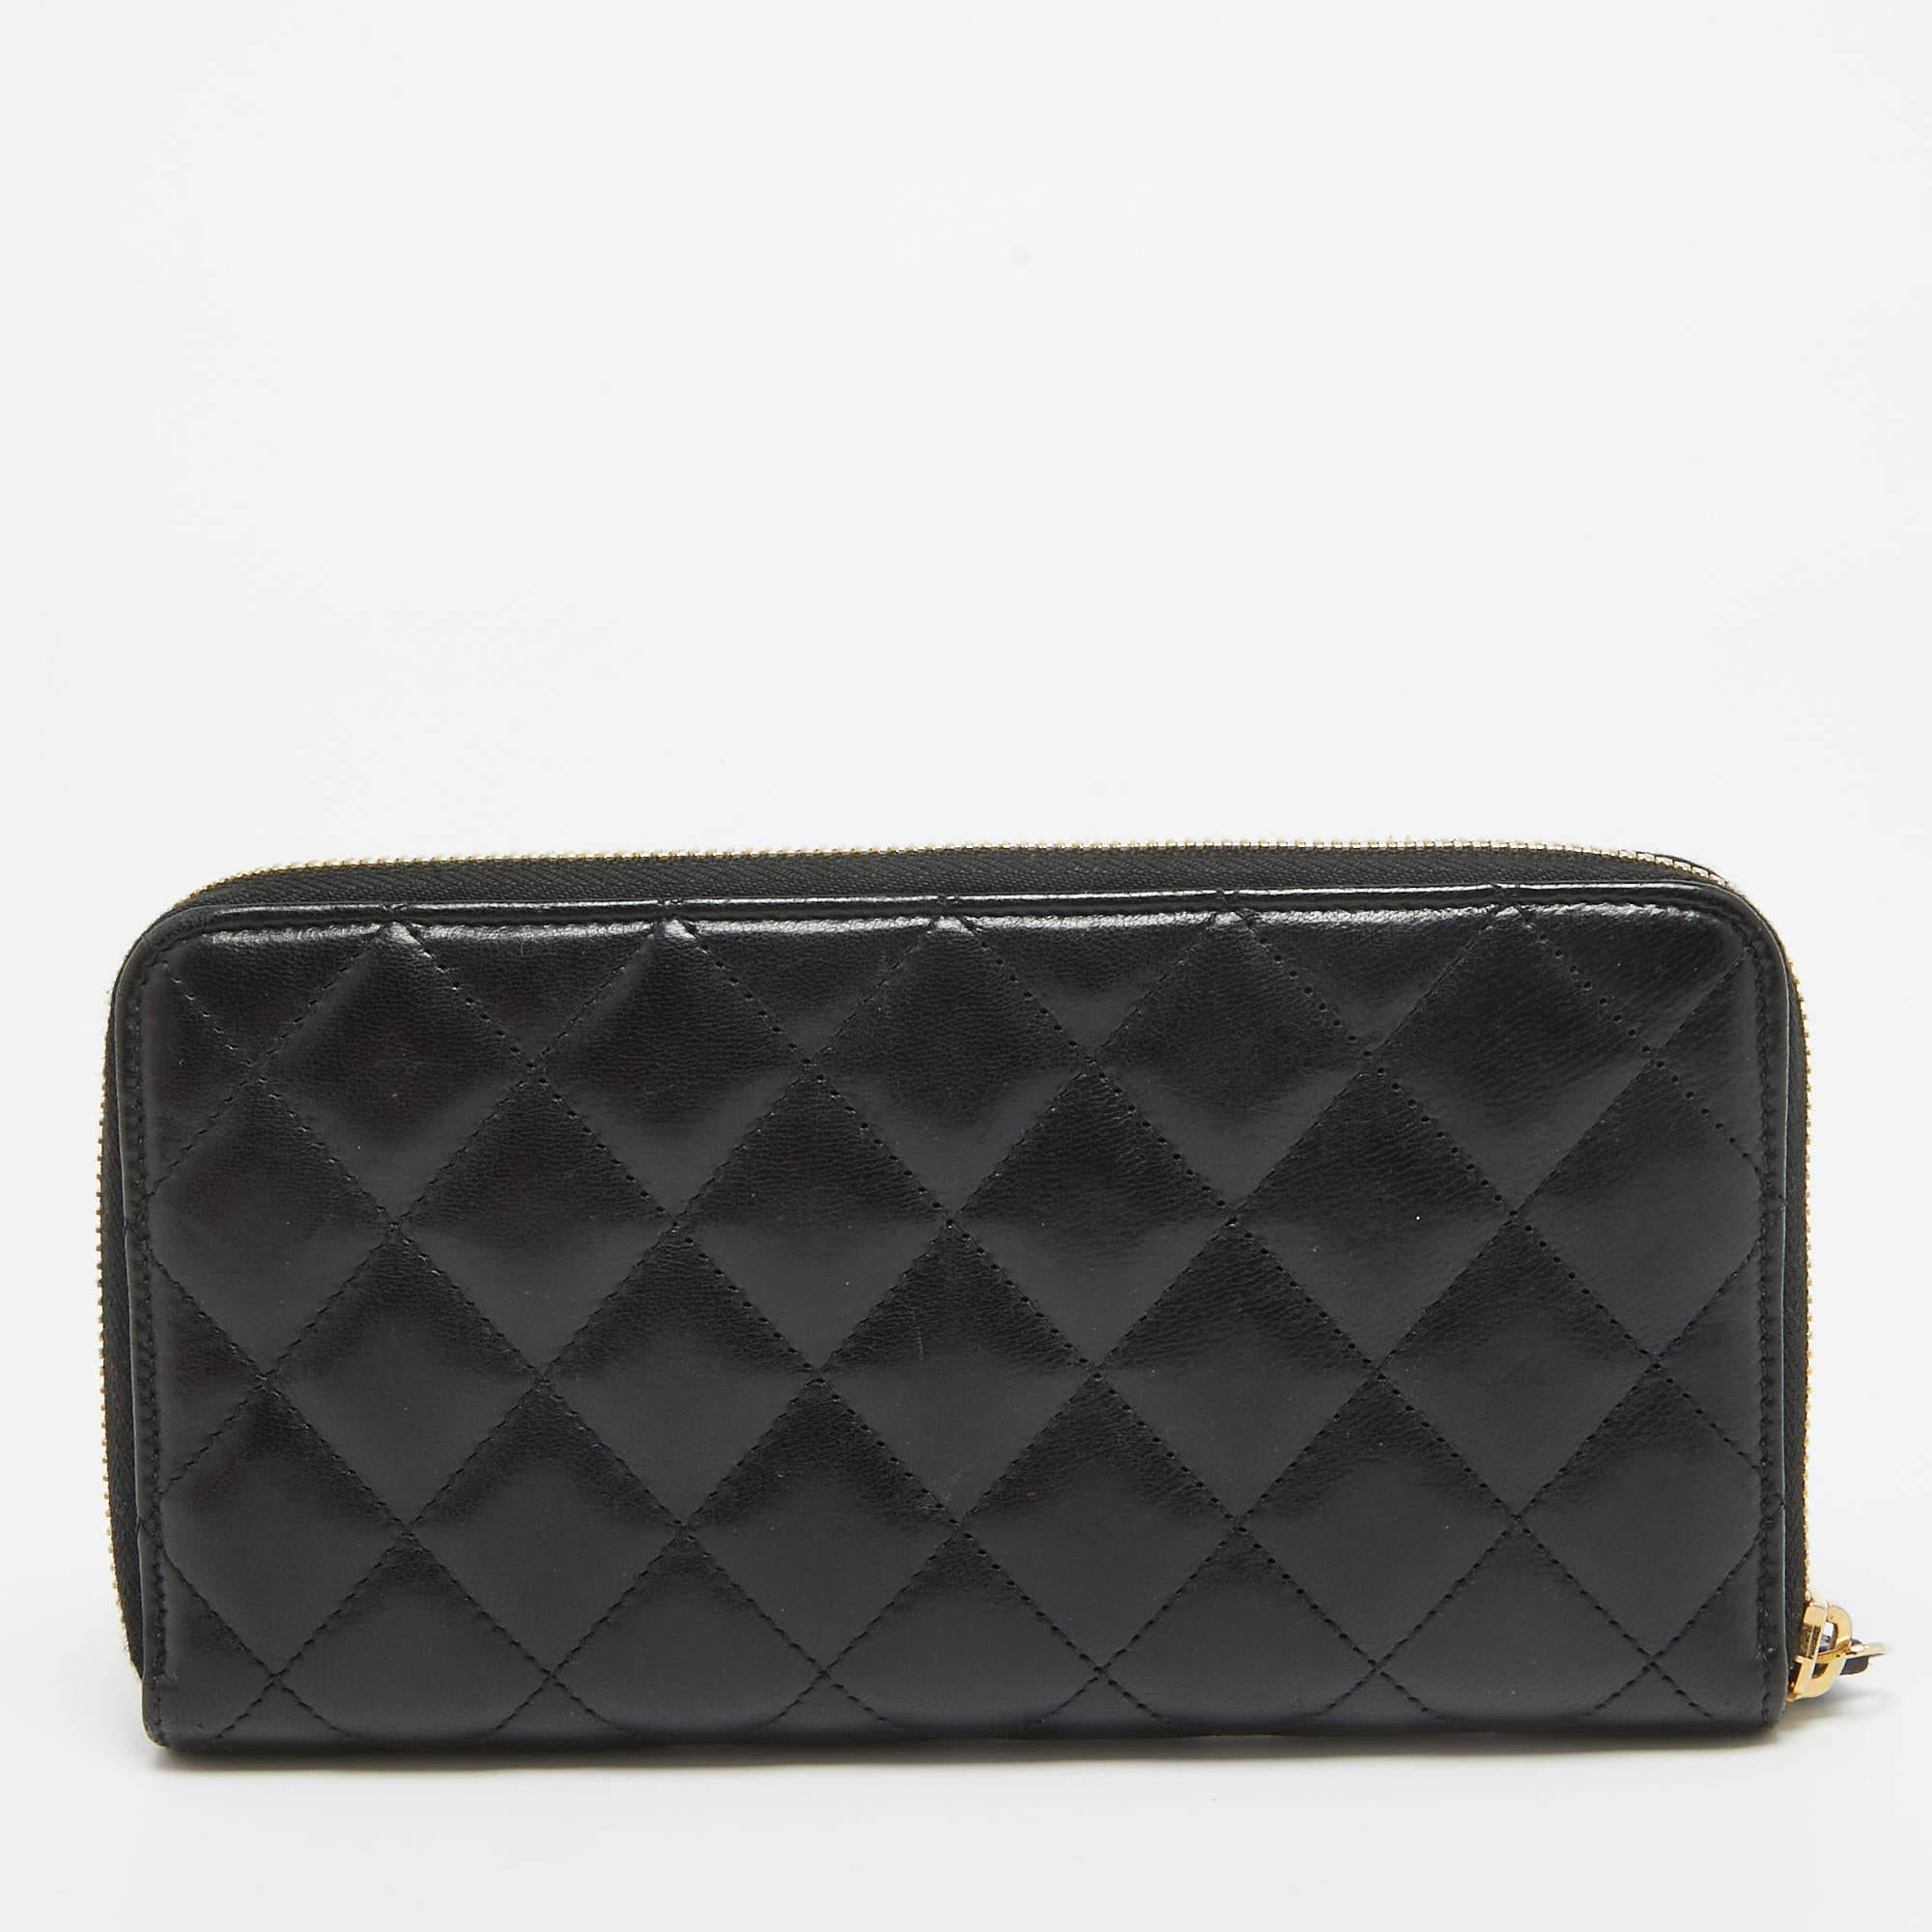 Chanel Black Quilted Leather Classic Zip Around Wallet In Good Condition For Sale In Dubai, Al Qouz 2